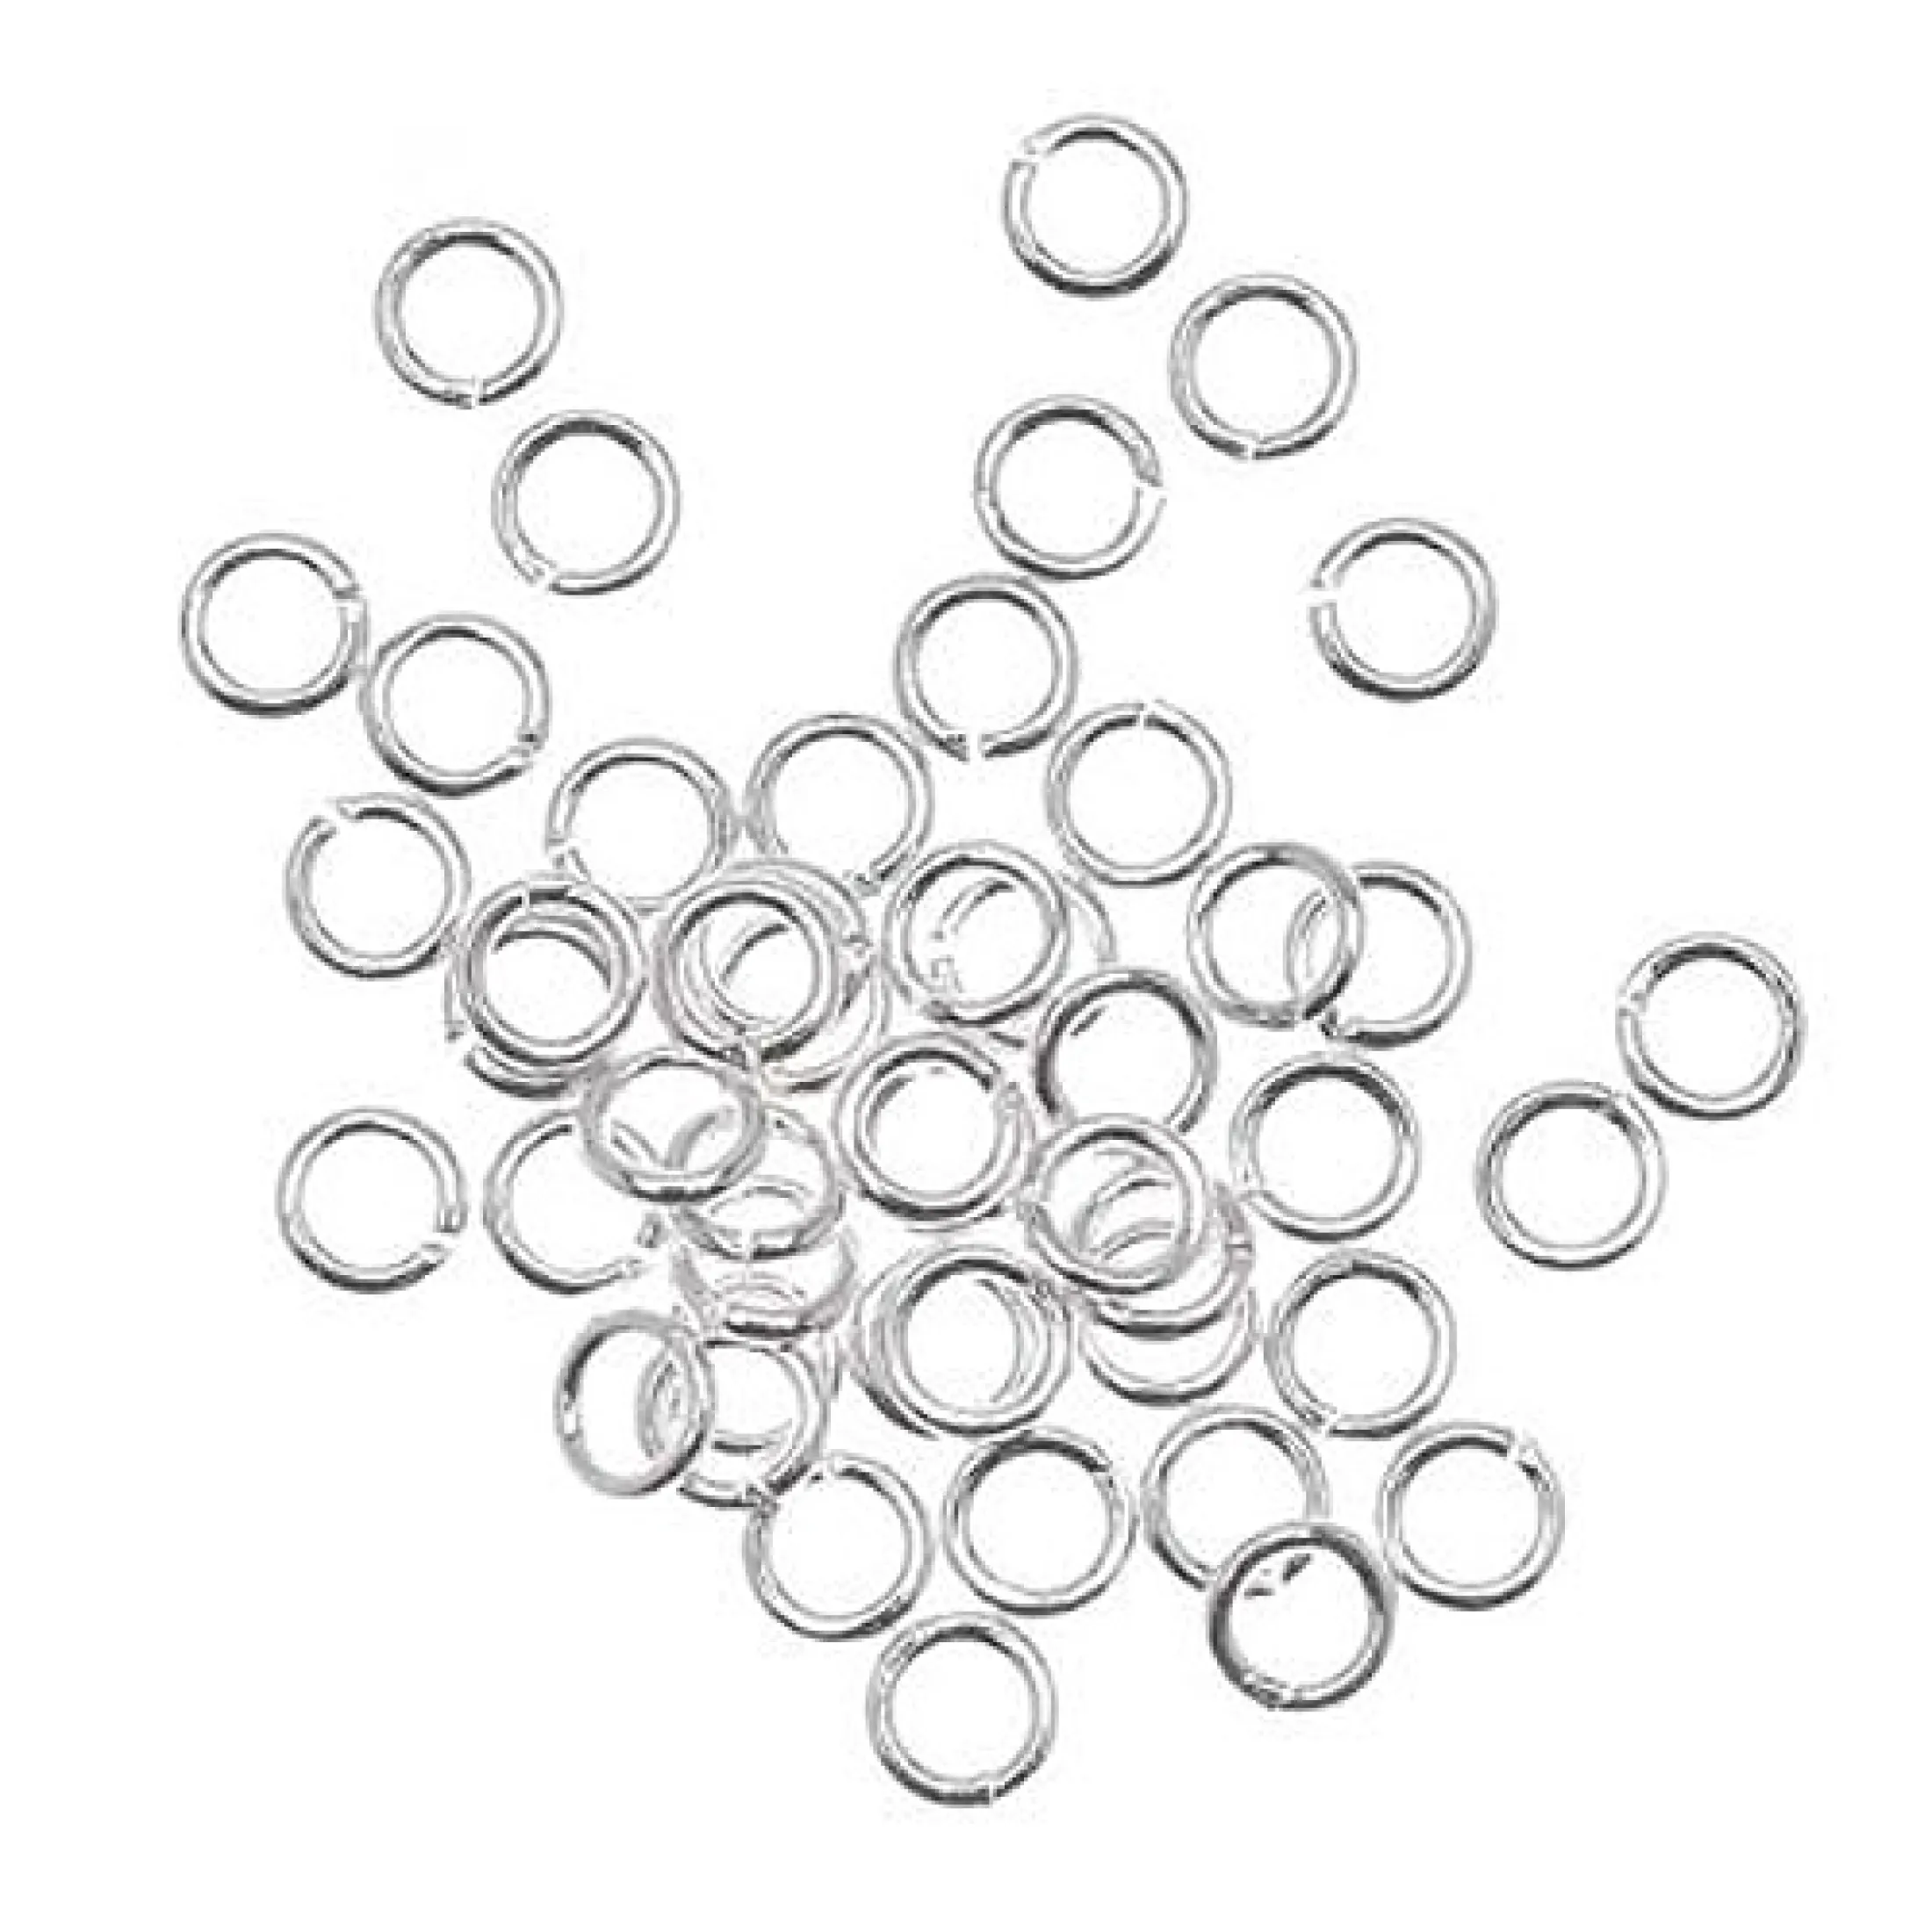 500 pièces Open Jump Rings for jewelry making, 4 mm, argent K2E4 2X